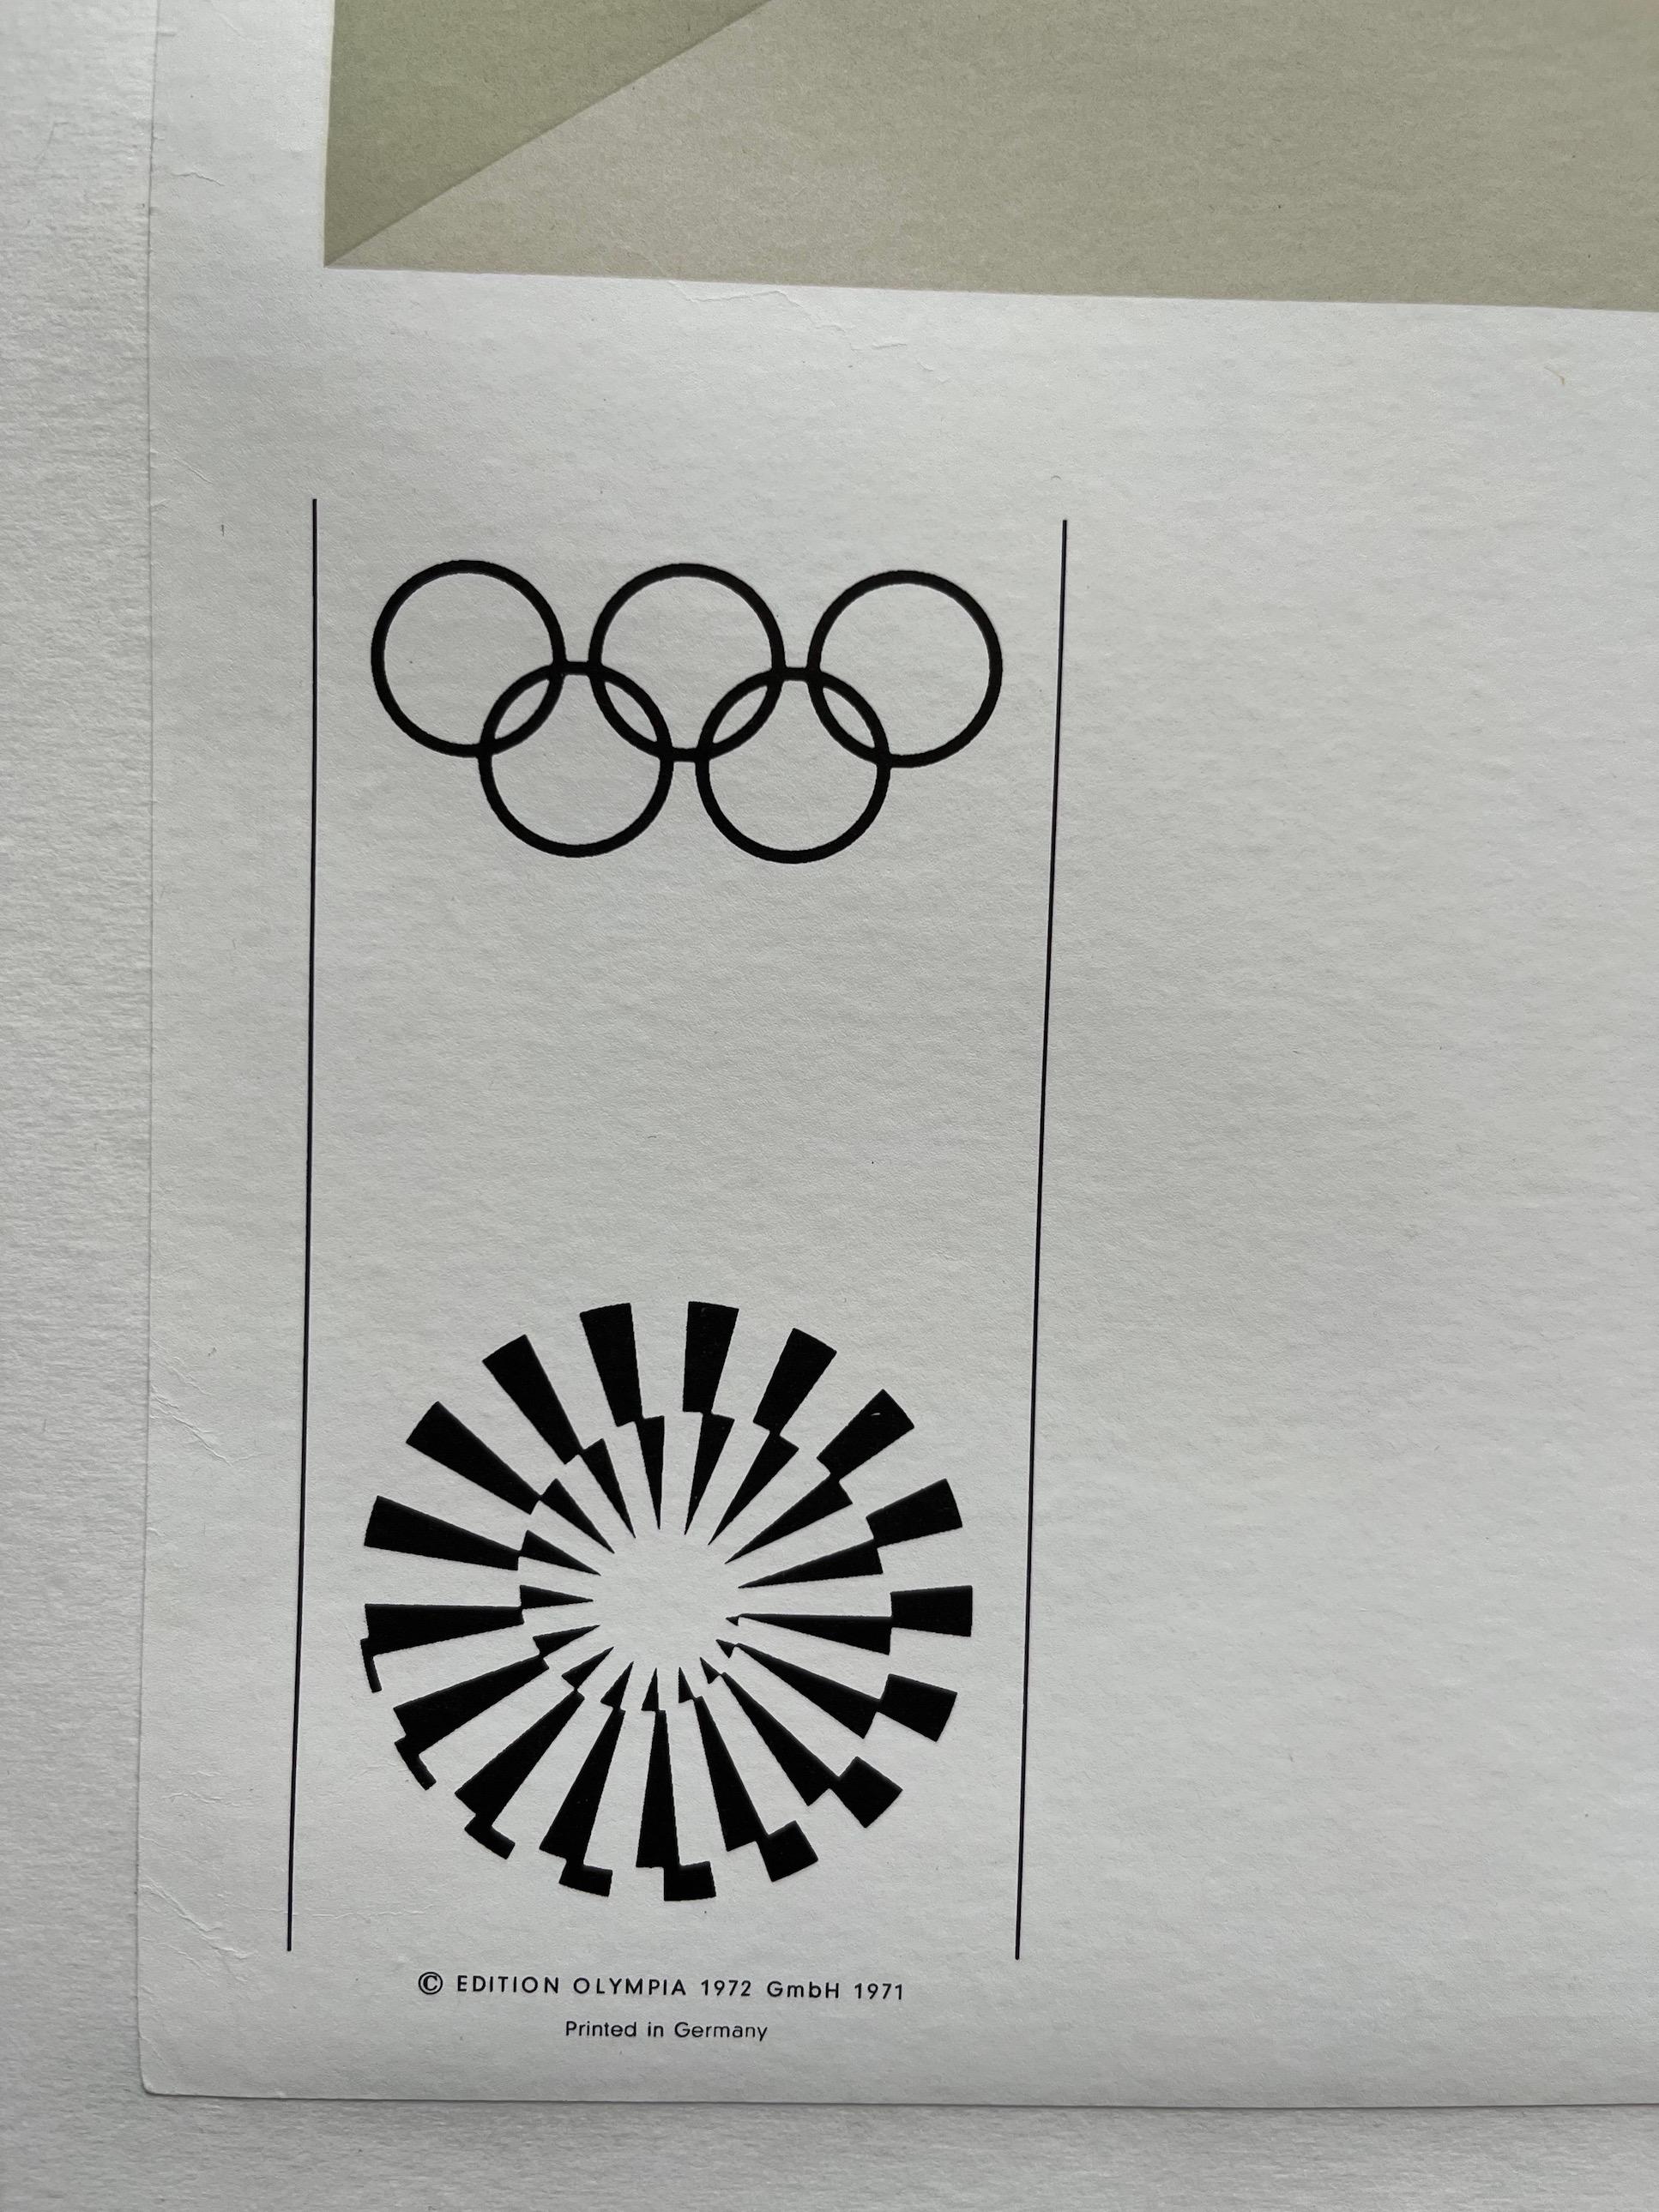 German 1972 Olympic Poster by Josef Albers For Sale